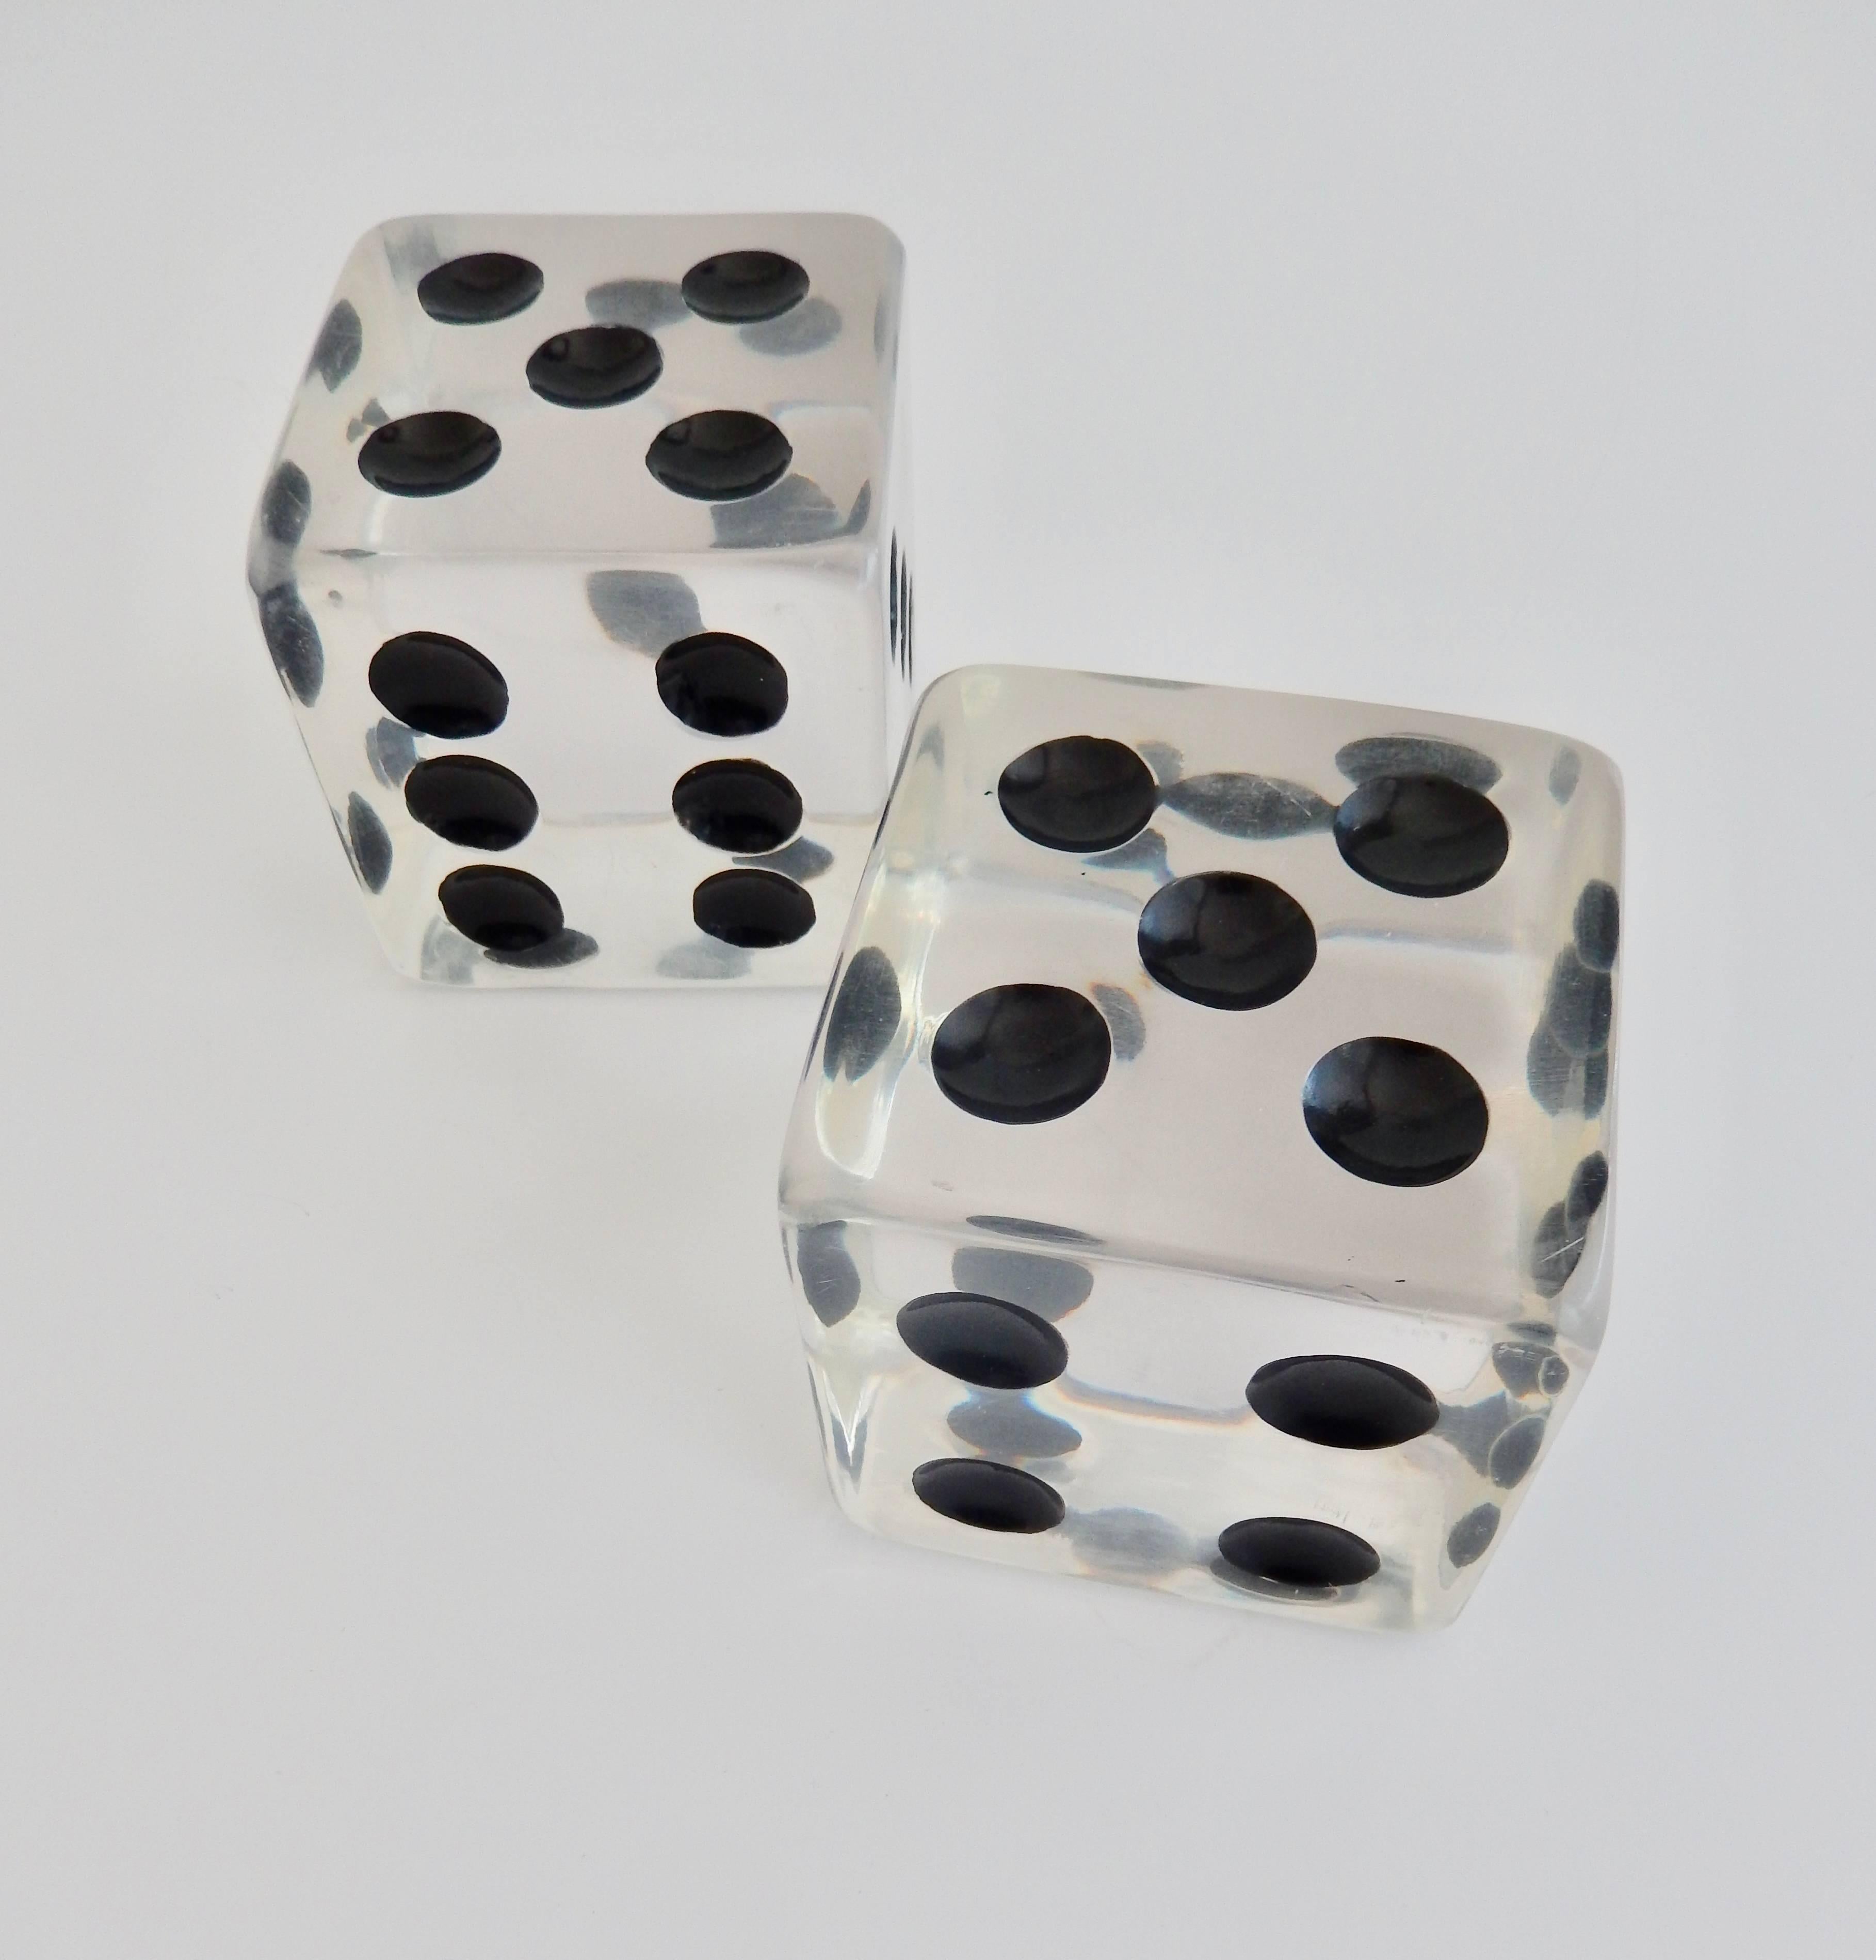 A pair of oversized, large dice in the manner of Charles Hollis Jones. The witty, large-scale design is reminiscent of
Pop Art sculpture. A perfect lucky gift for a gambler or art collector.